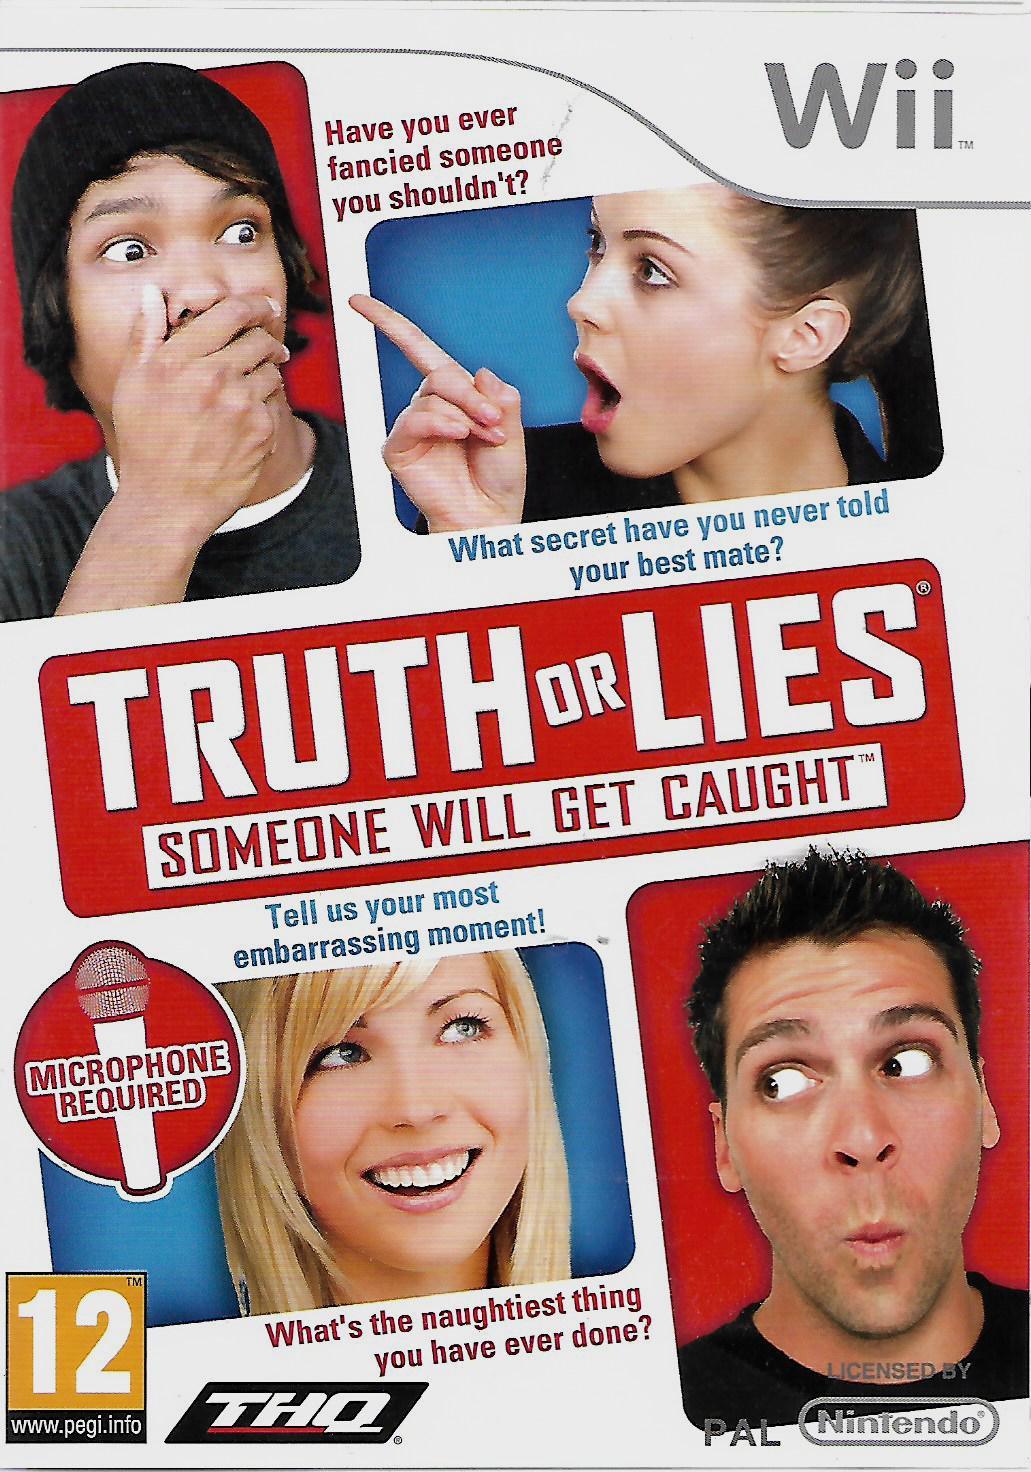 TRUTH OR LIES - SOMEONE WILL GET CAUGHT (WII - bazar)